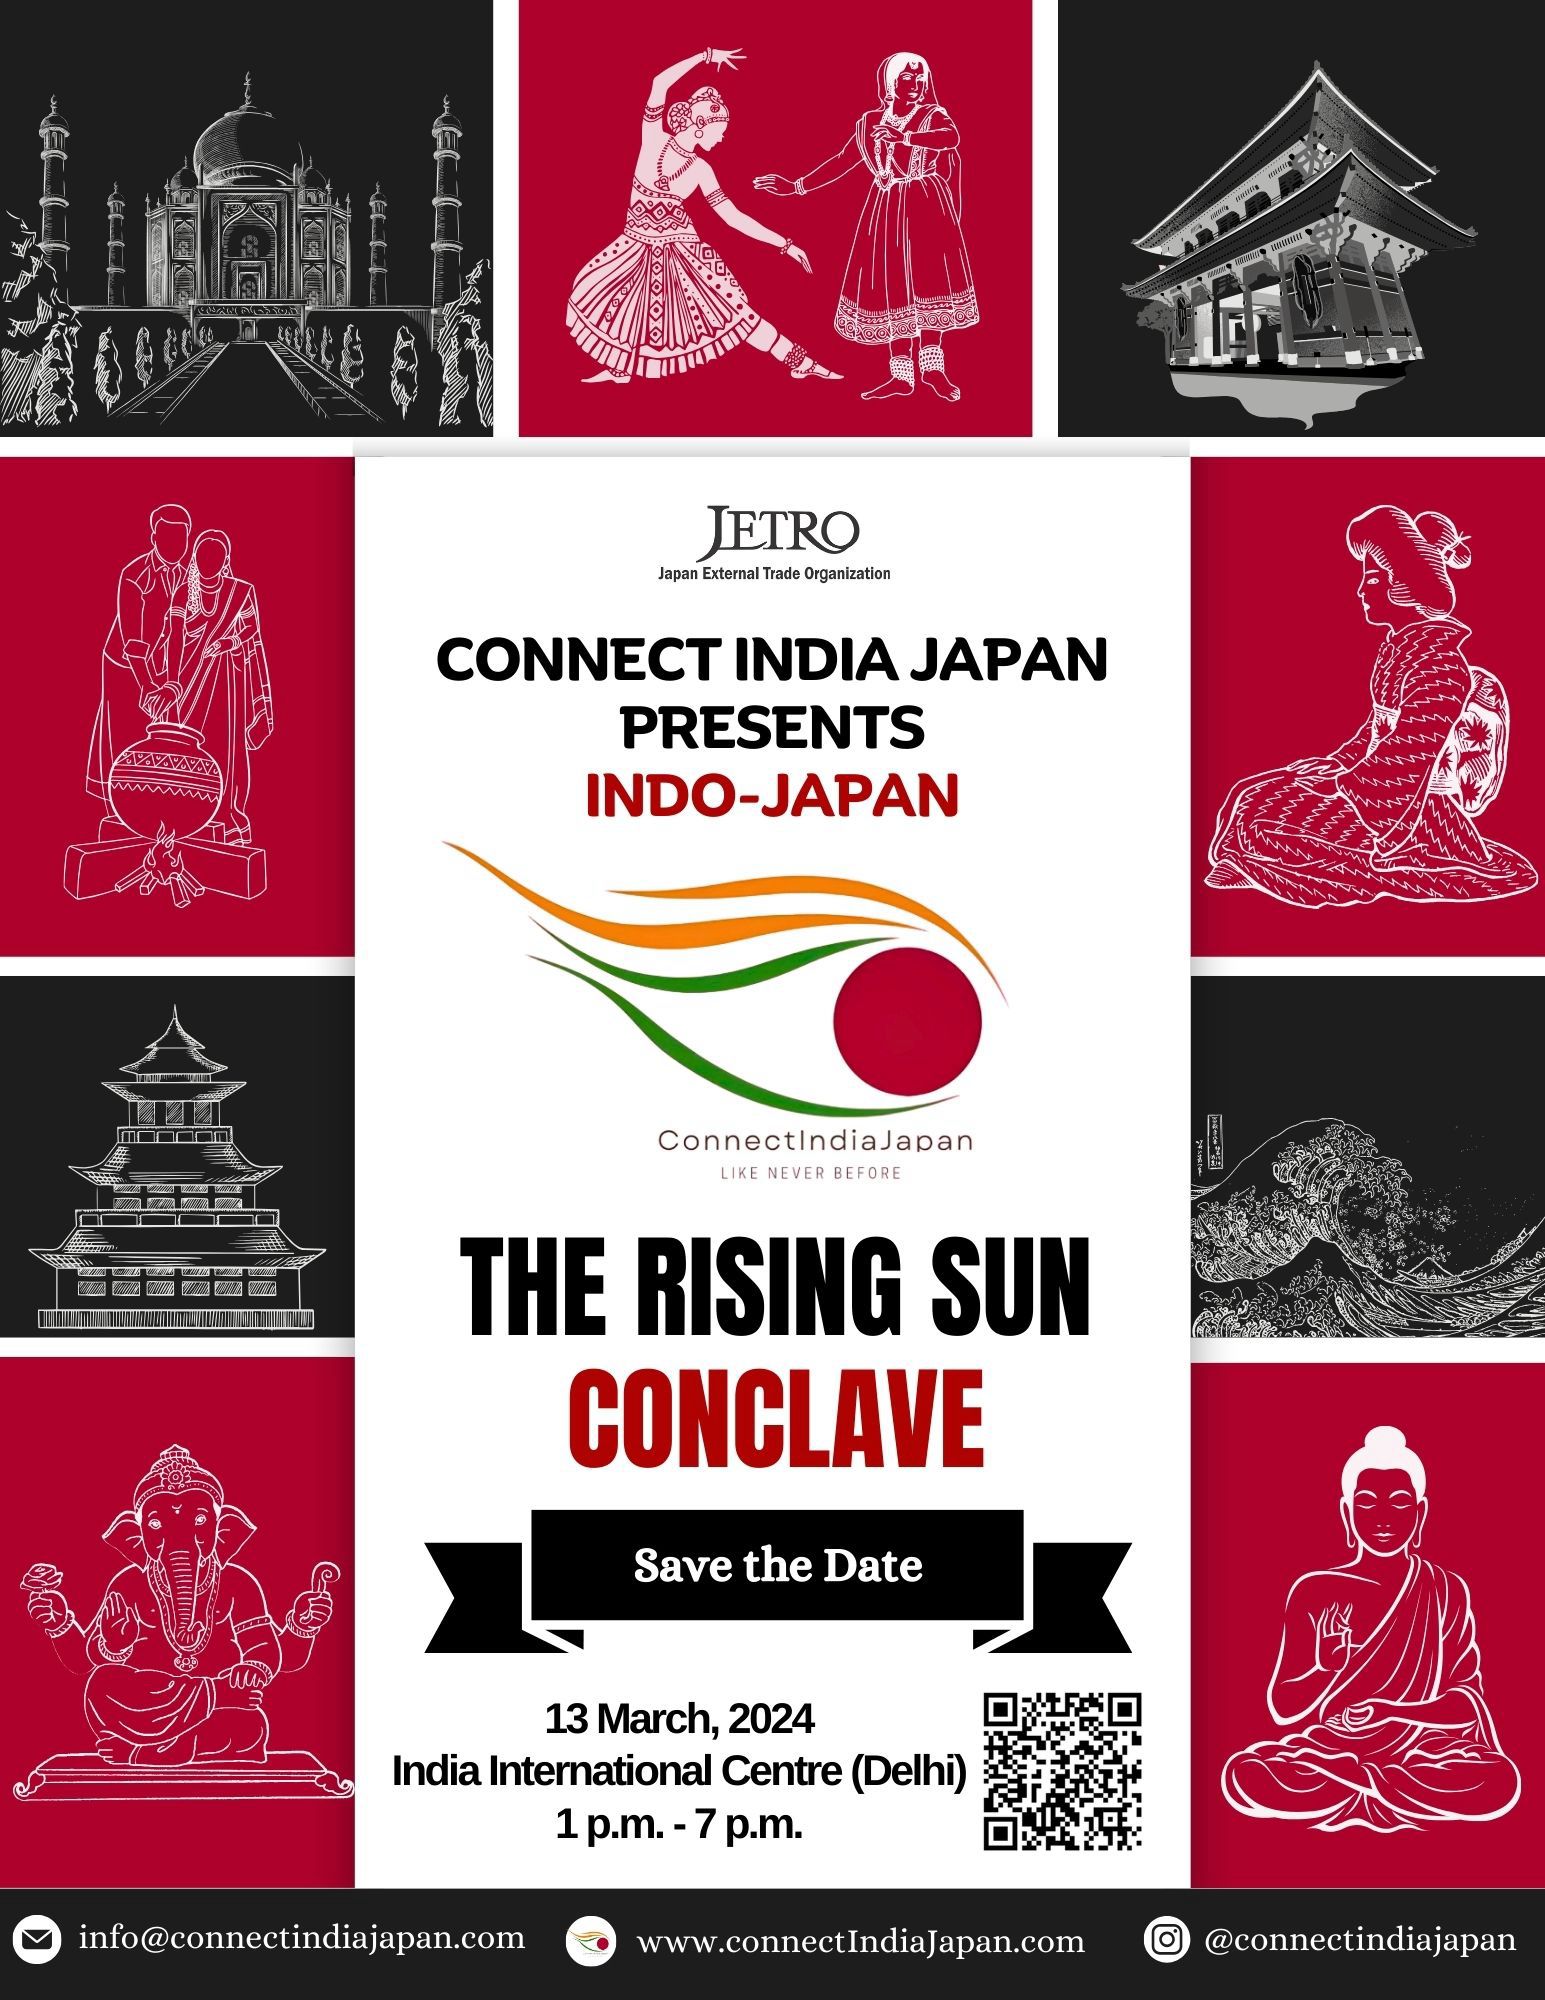 The Rising Sun Conclave